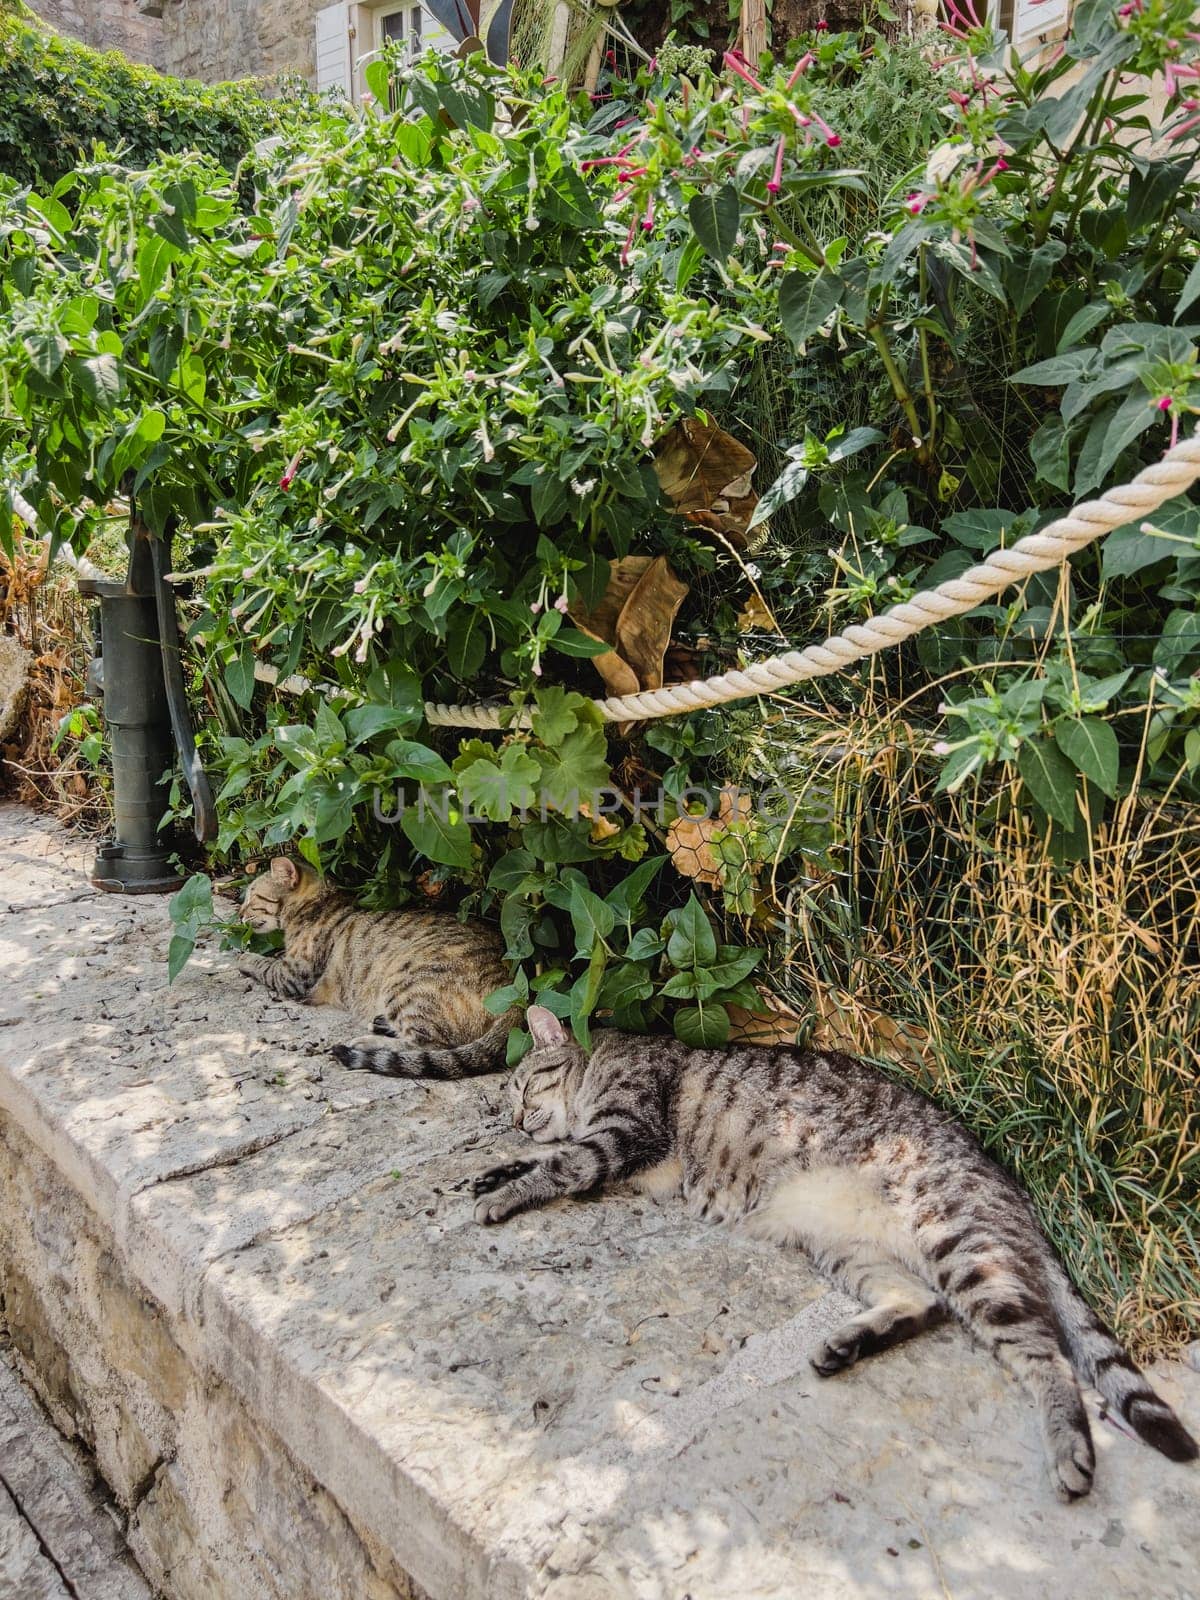 Striped cats sleep on a stone fence near green bushes. High quality photo